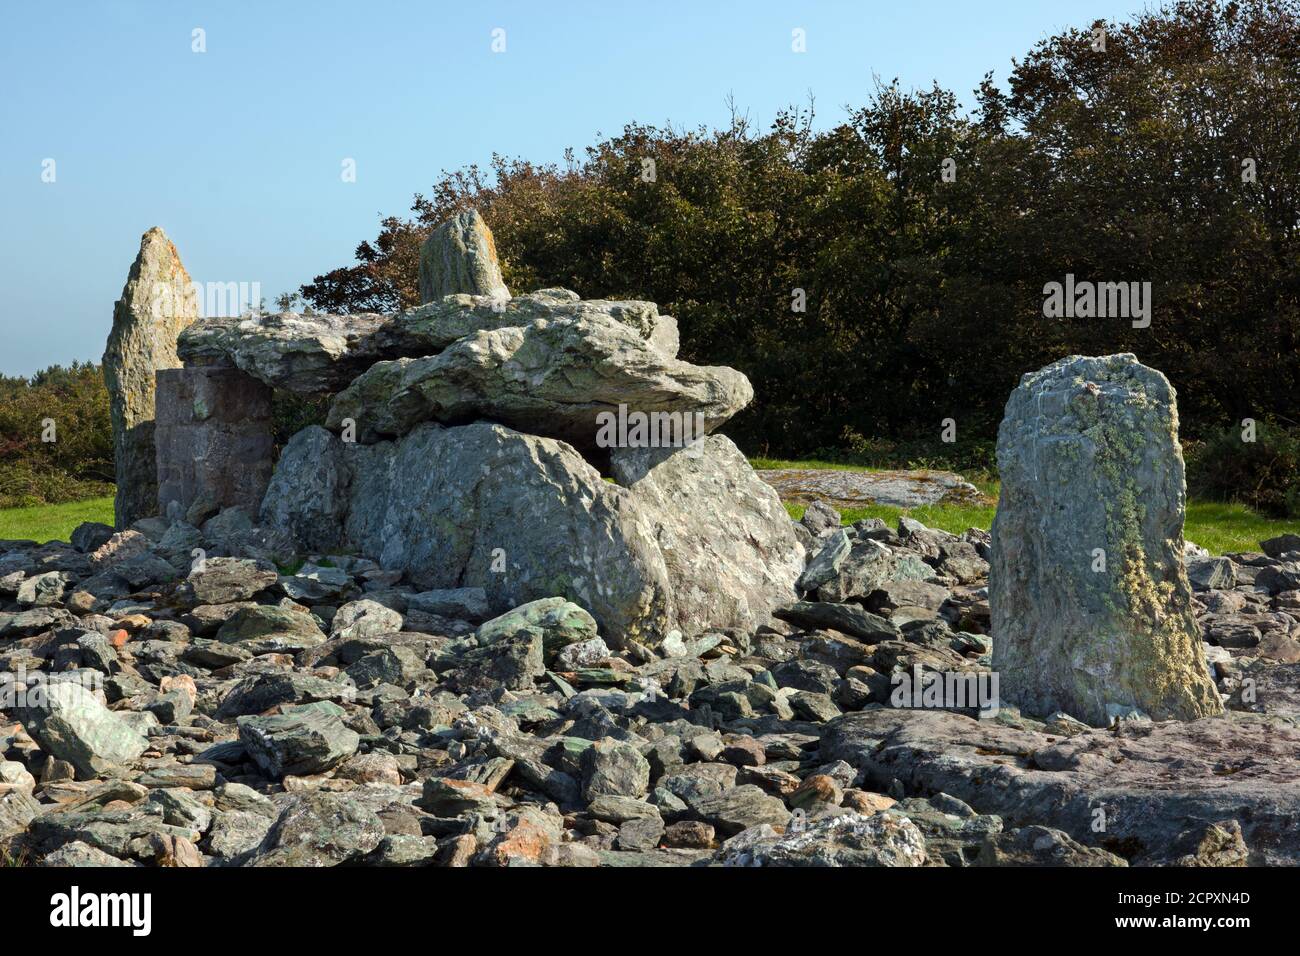 Trefignath is a Neolithic burial chamber near Trearddur, Holy Island, Anglesey in North Wales. It includes three stone tombs. Stock Photo